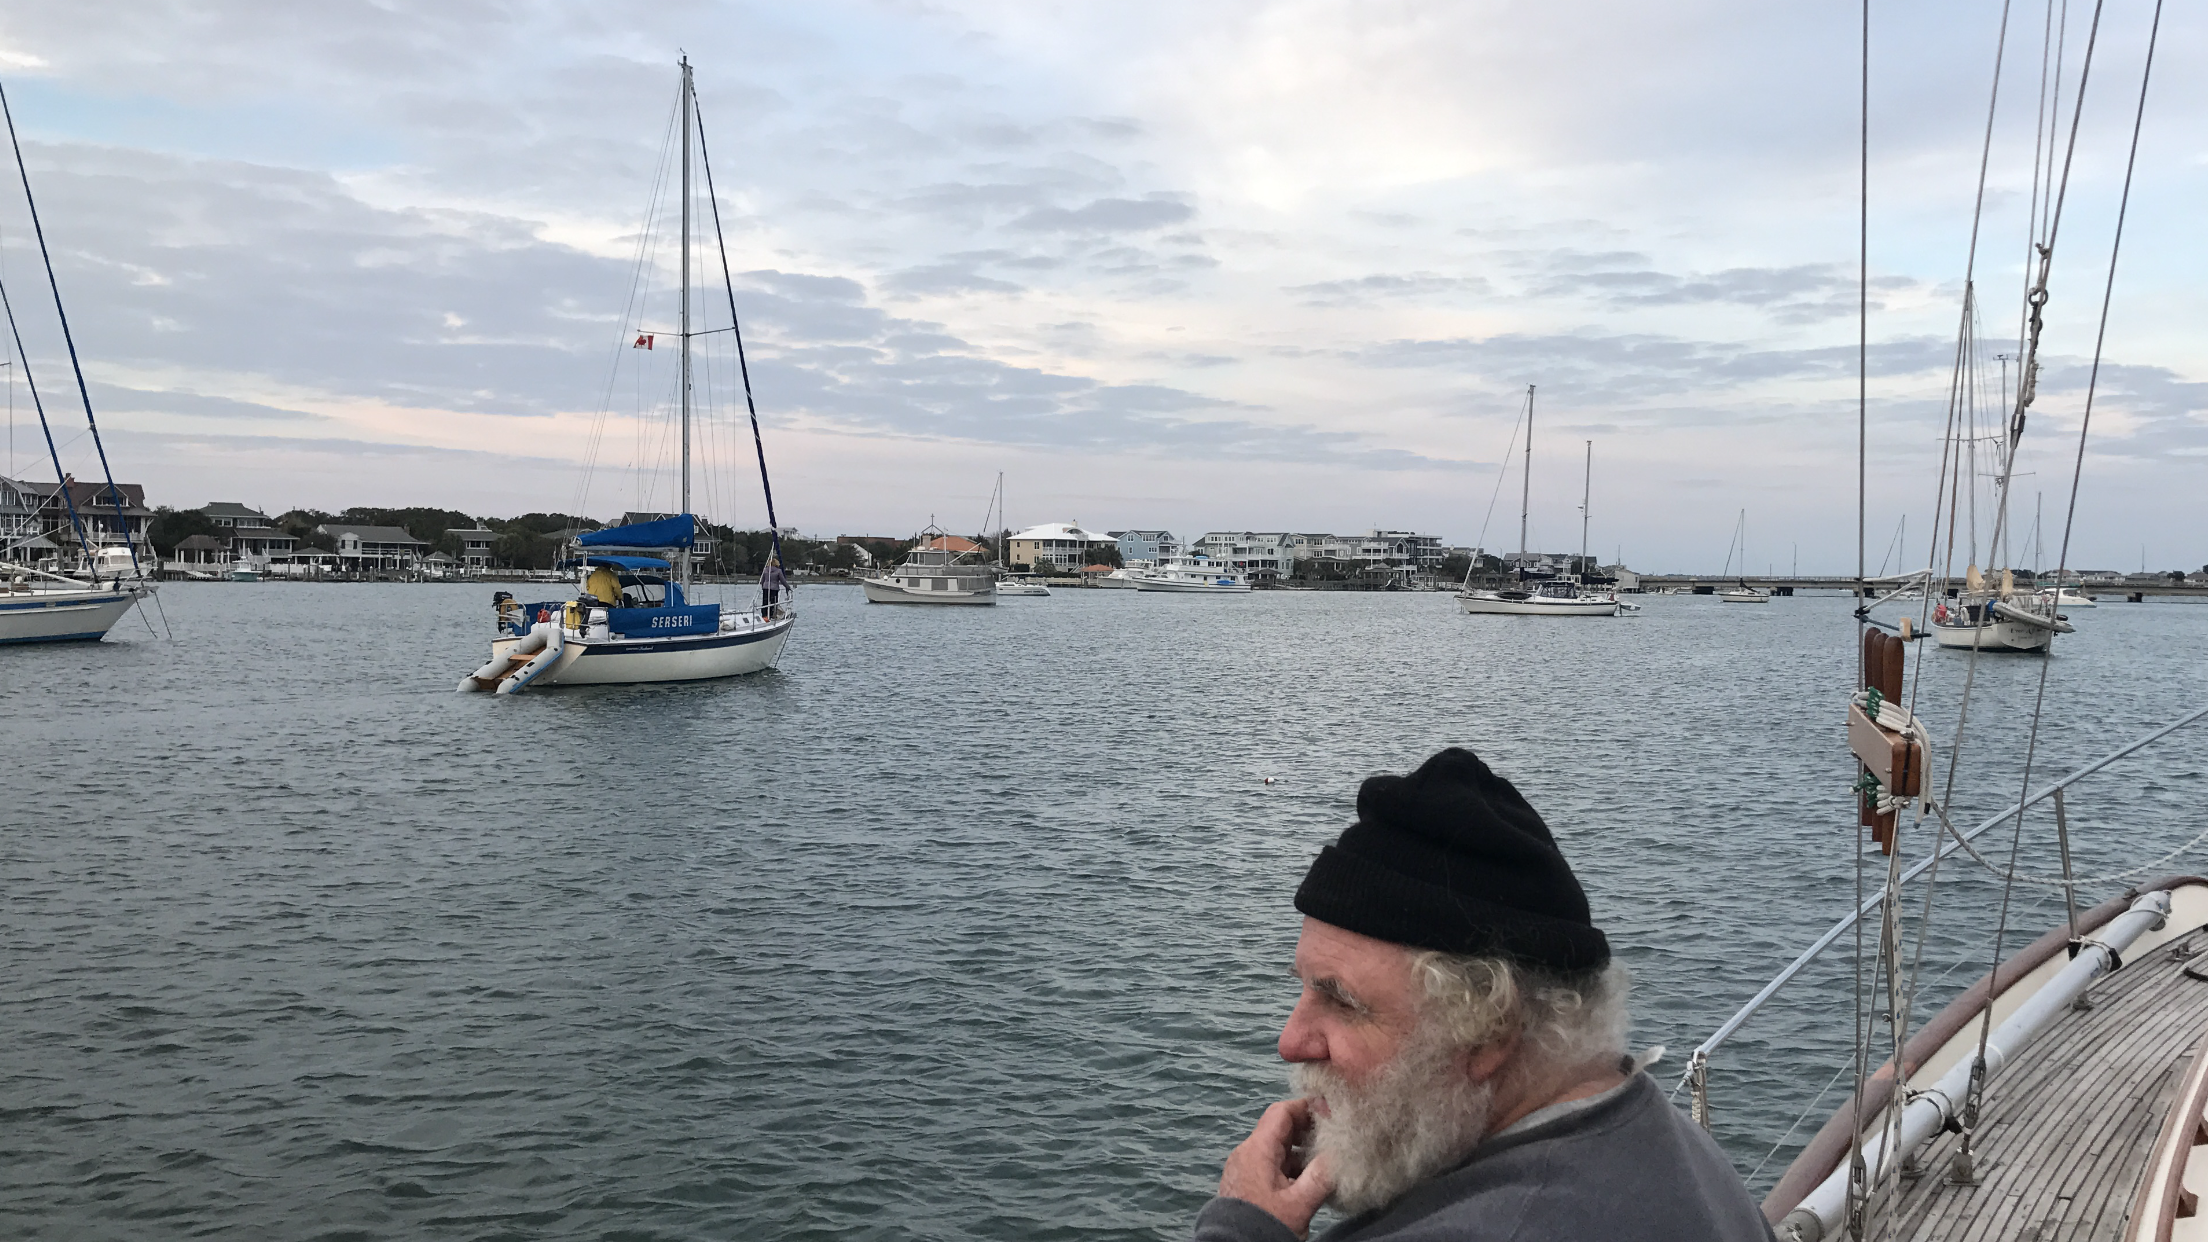 I study the crowded anchorage at Wrightsville Beach